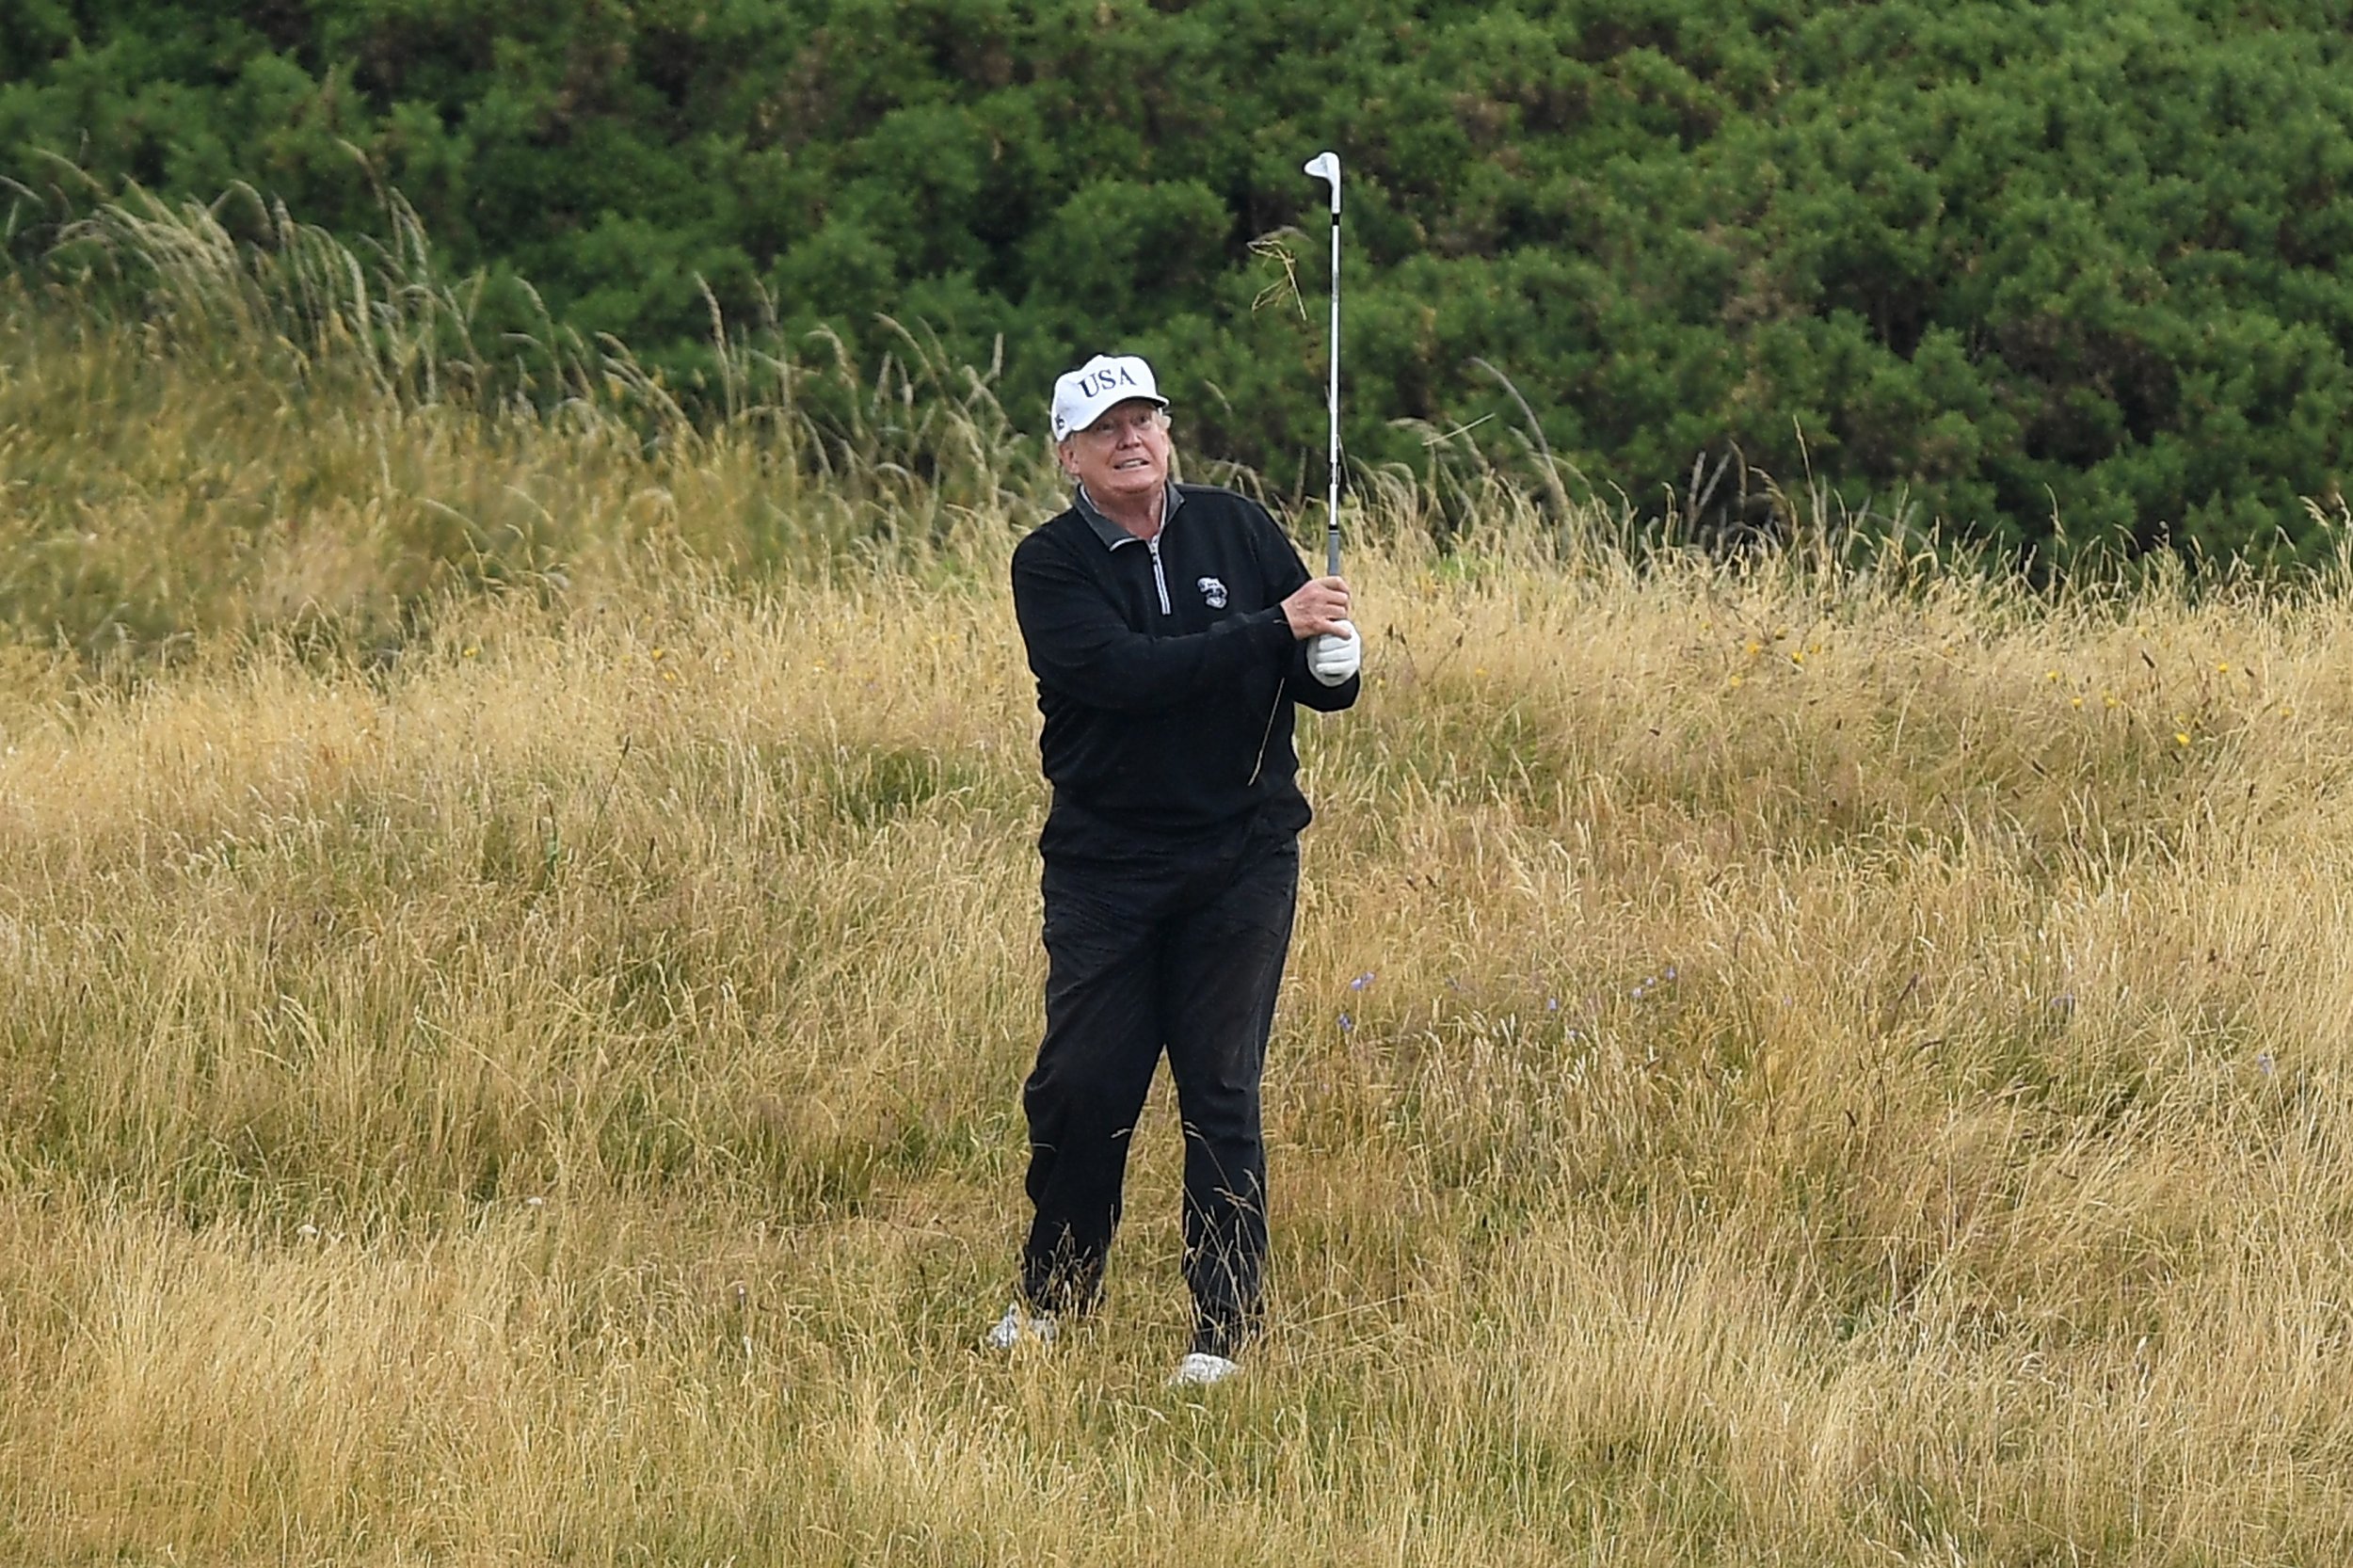 Trump's Golfing has Cost Taxpayers $102 Million, Just $12.7 Million Behind  Obama's Travel During Entire Presidency: Report